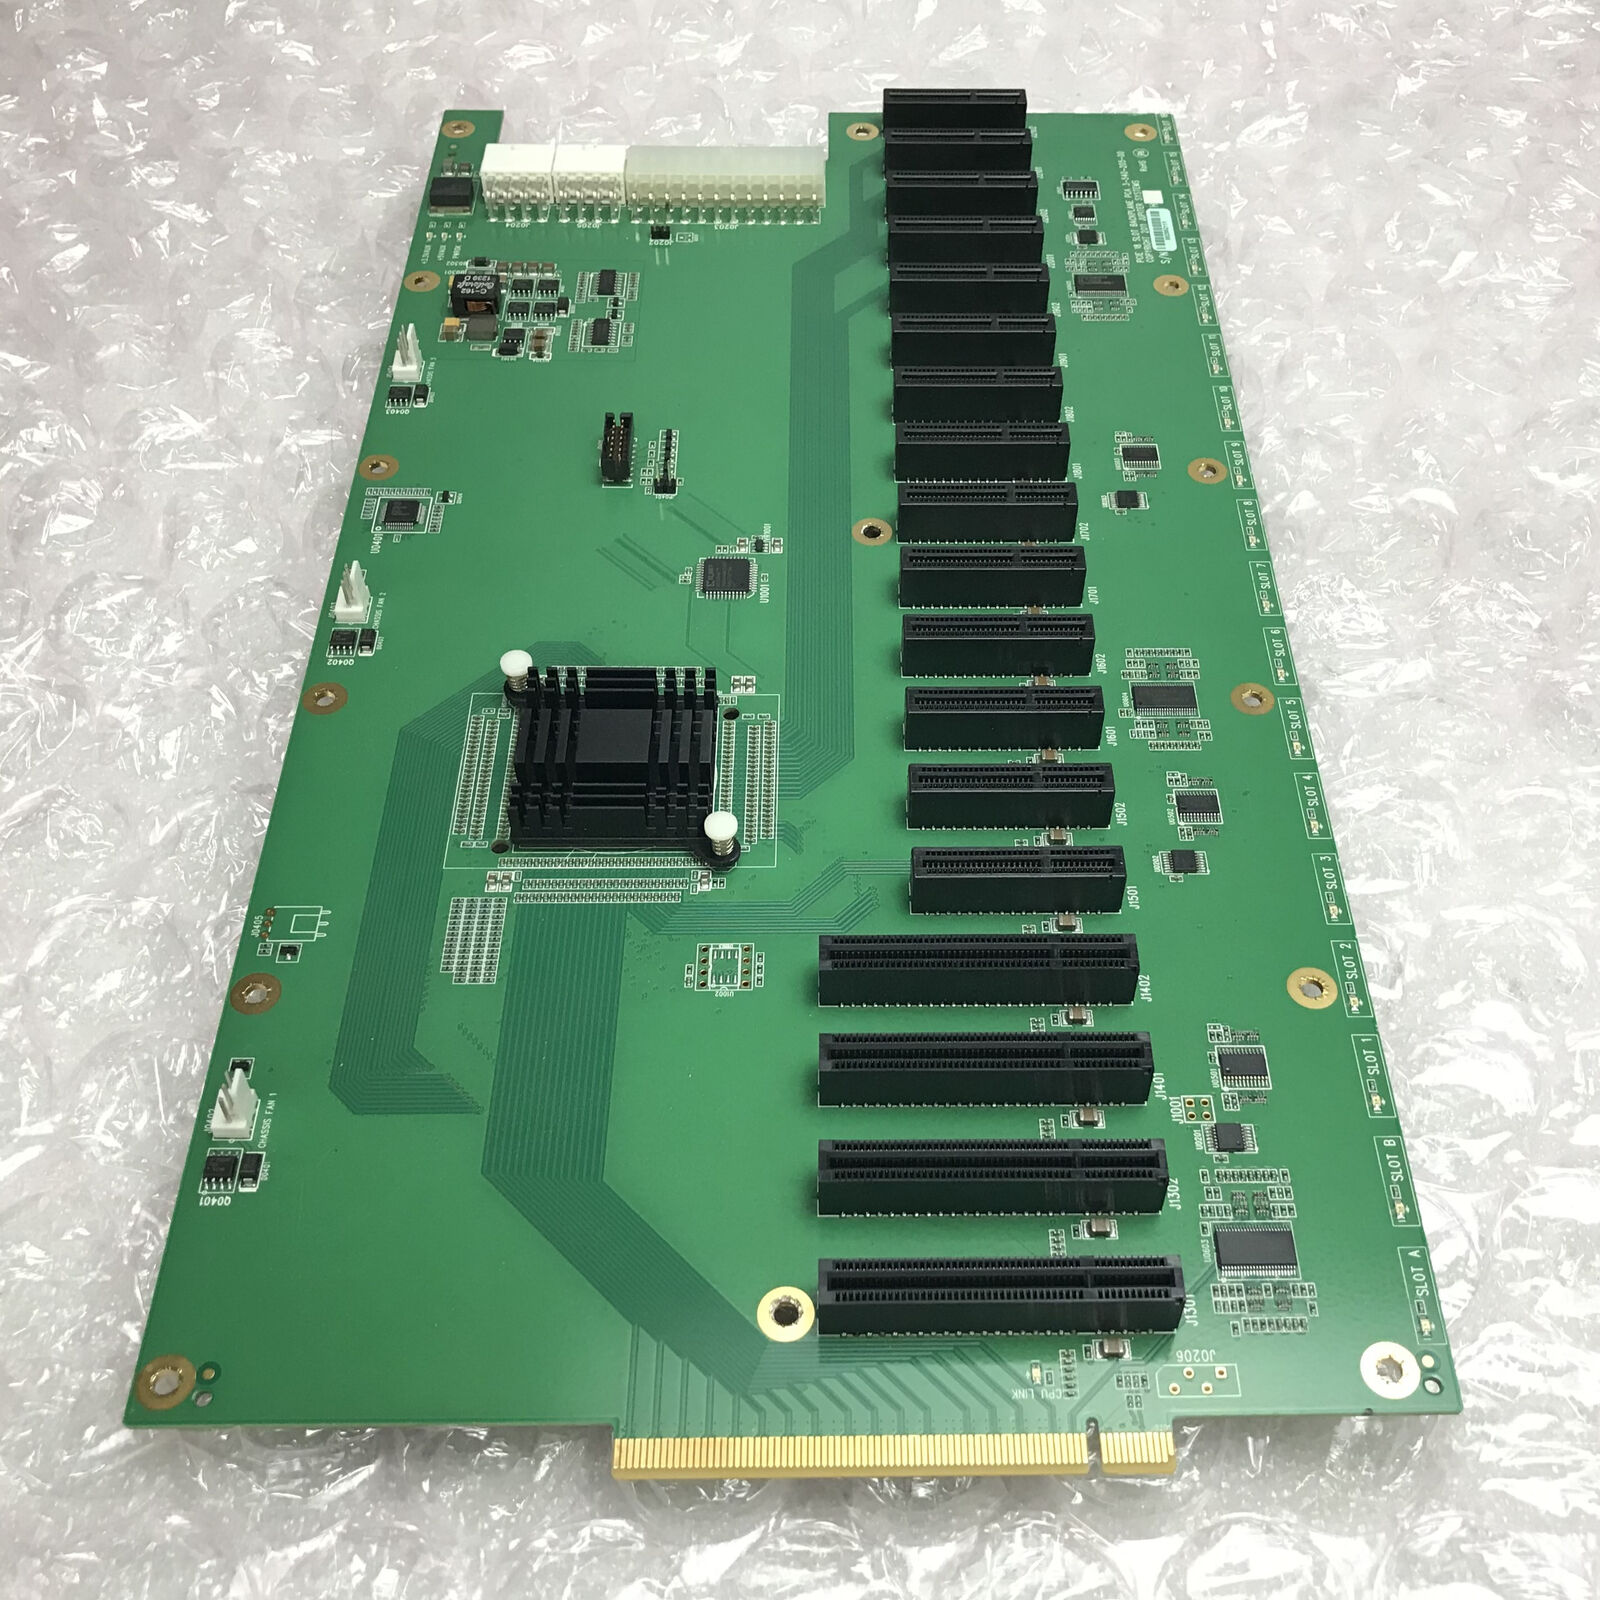 PCIE 18 SLOT BACKPLANE PCA 3-540-205-00 JUPITER SYSTEMS PULLED FROM WORKING SYS